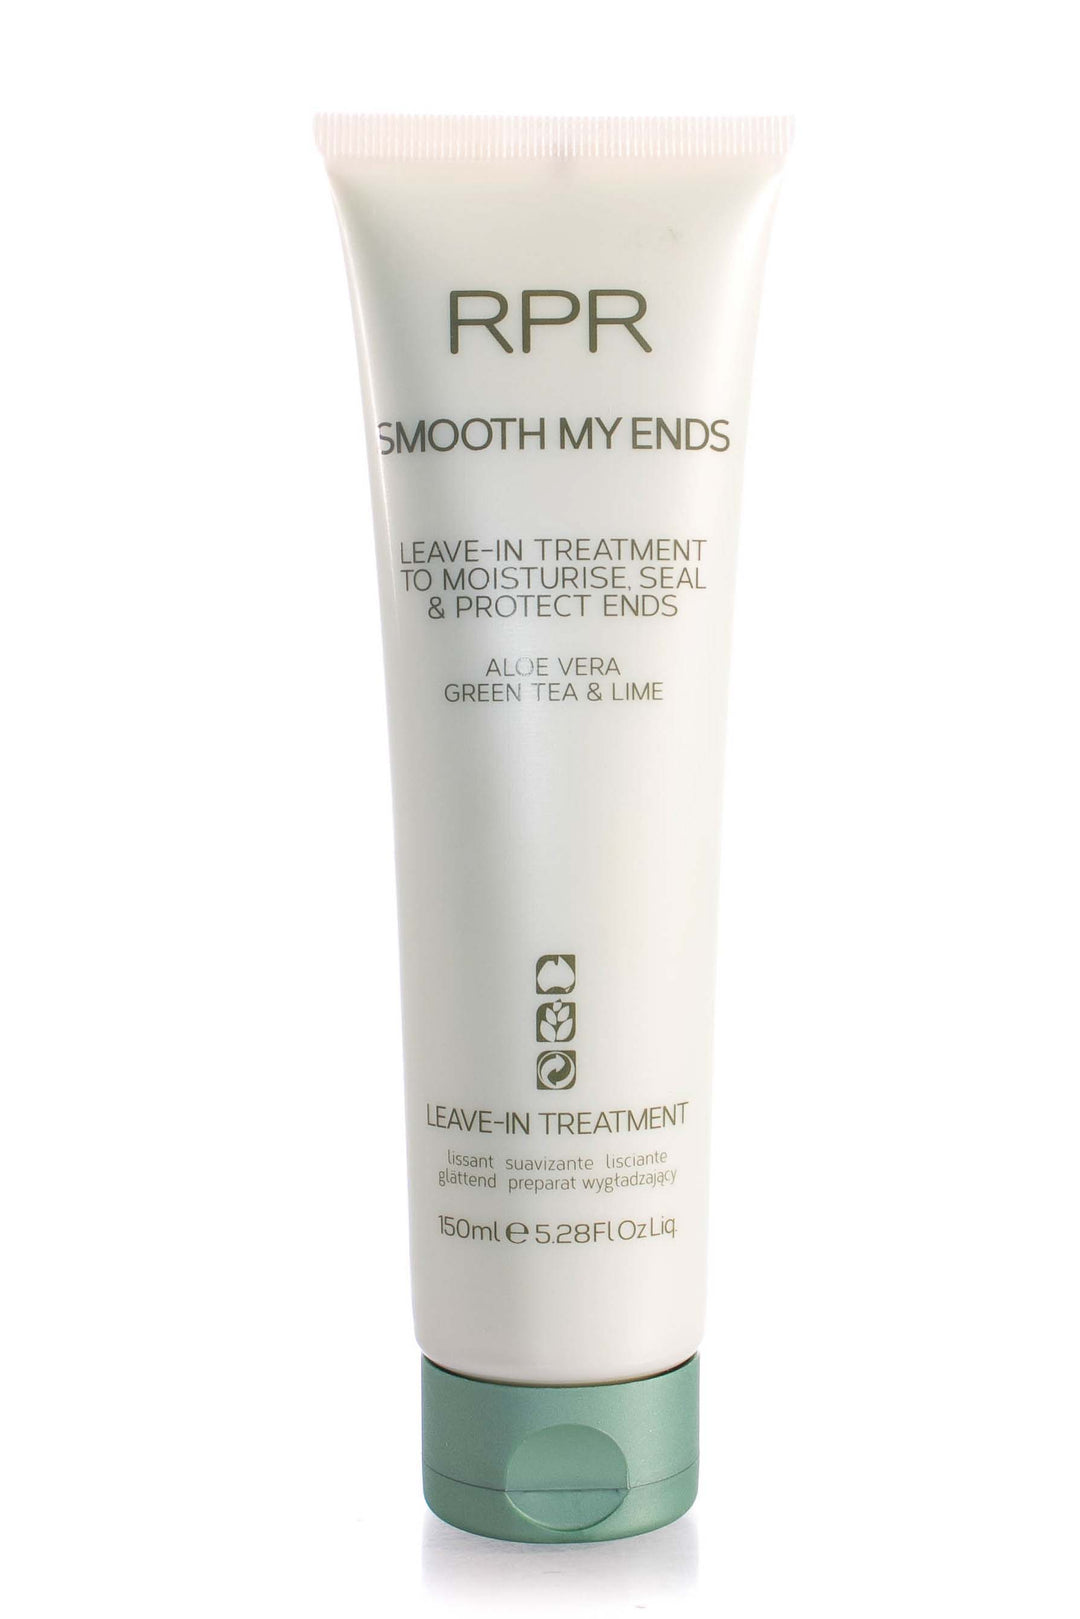 rpr-smooth-my-ends-150ml